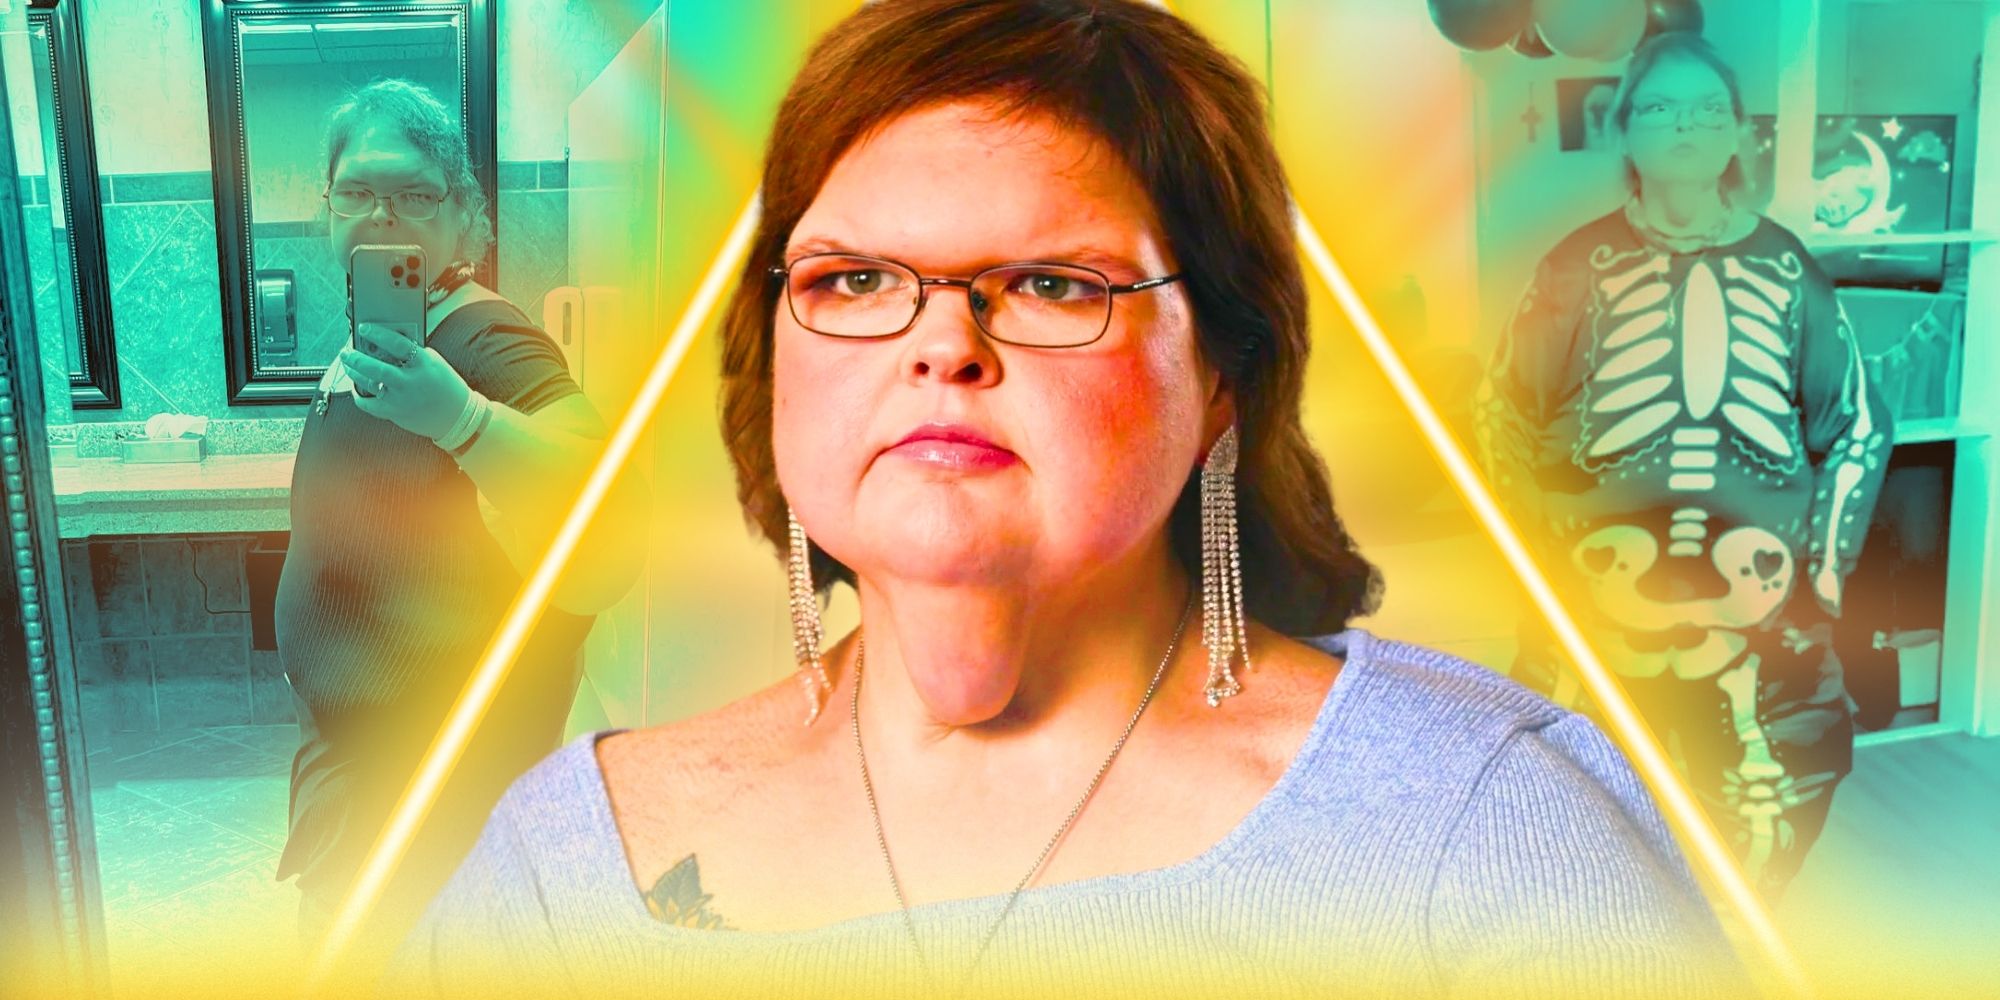 1000-Lb Sisters' Tammy Slaton wearing gray top with long rhinestone earrings and open hair with a yellow neon light around her